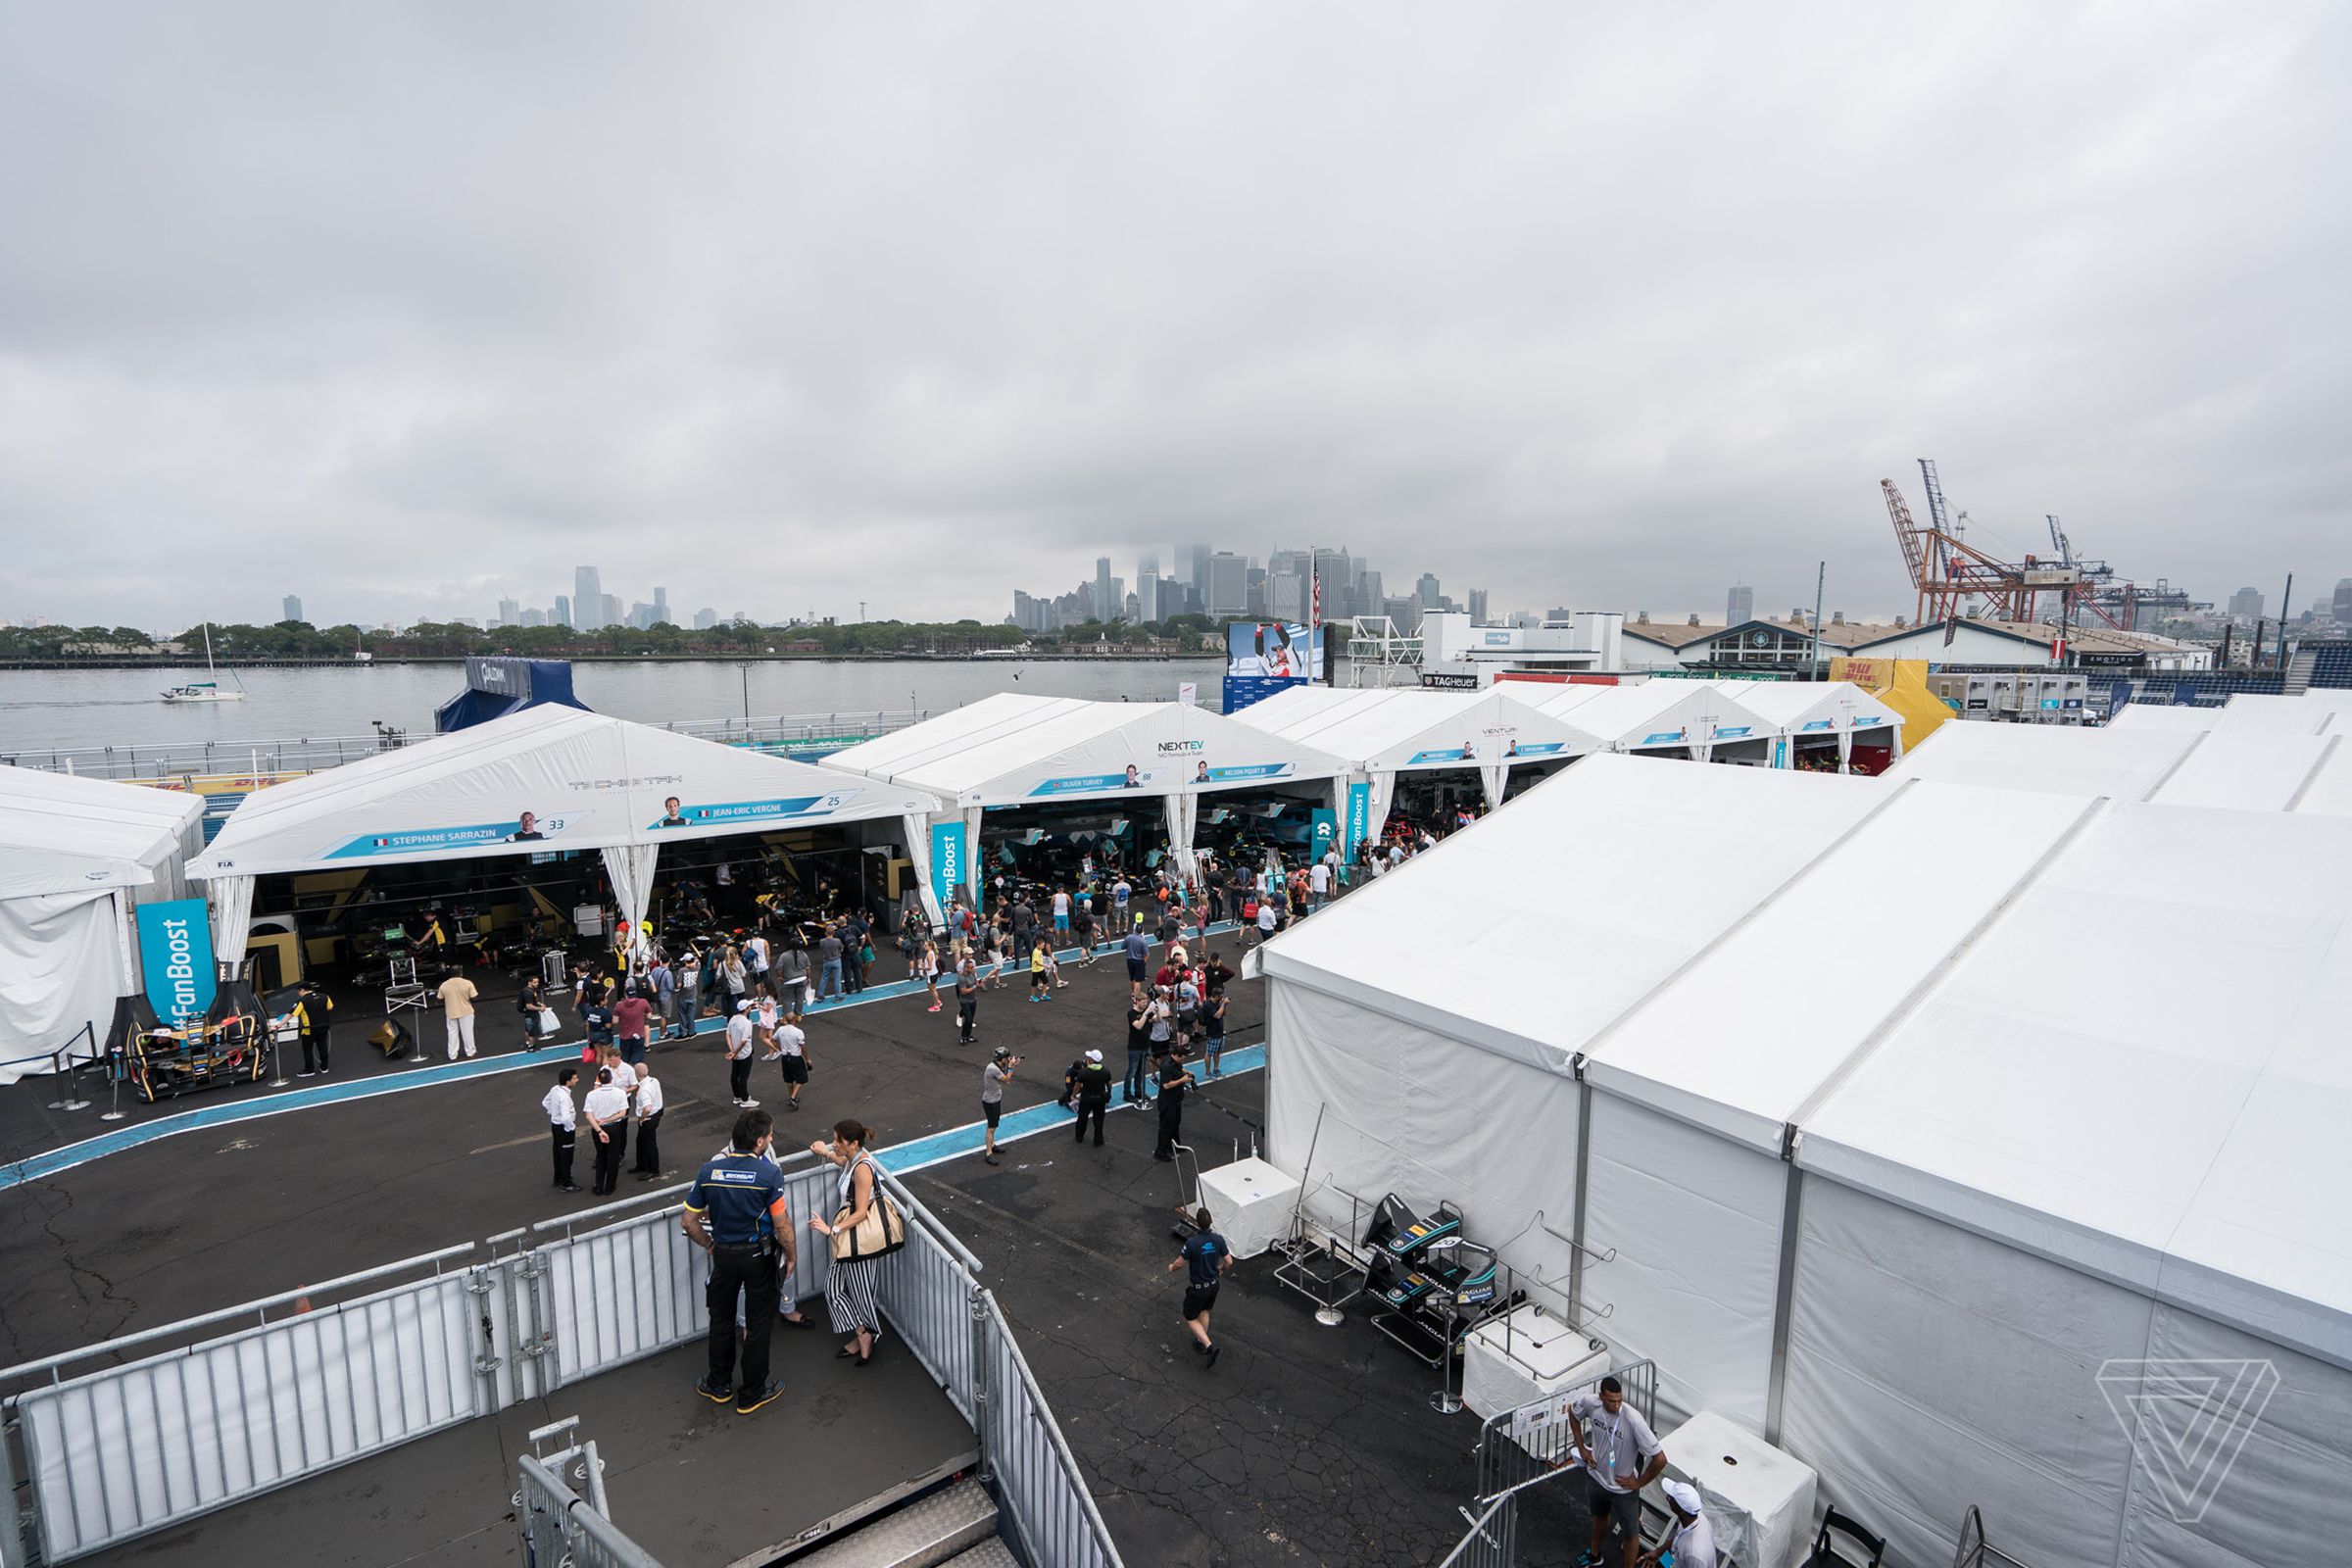 A view of the pit area, or “paddock,” with the southern tip of Manhattan shrouded in clouds in the background. 